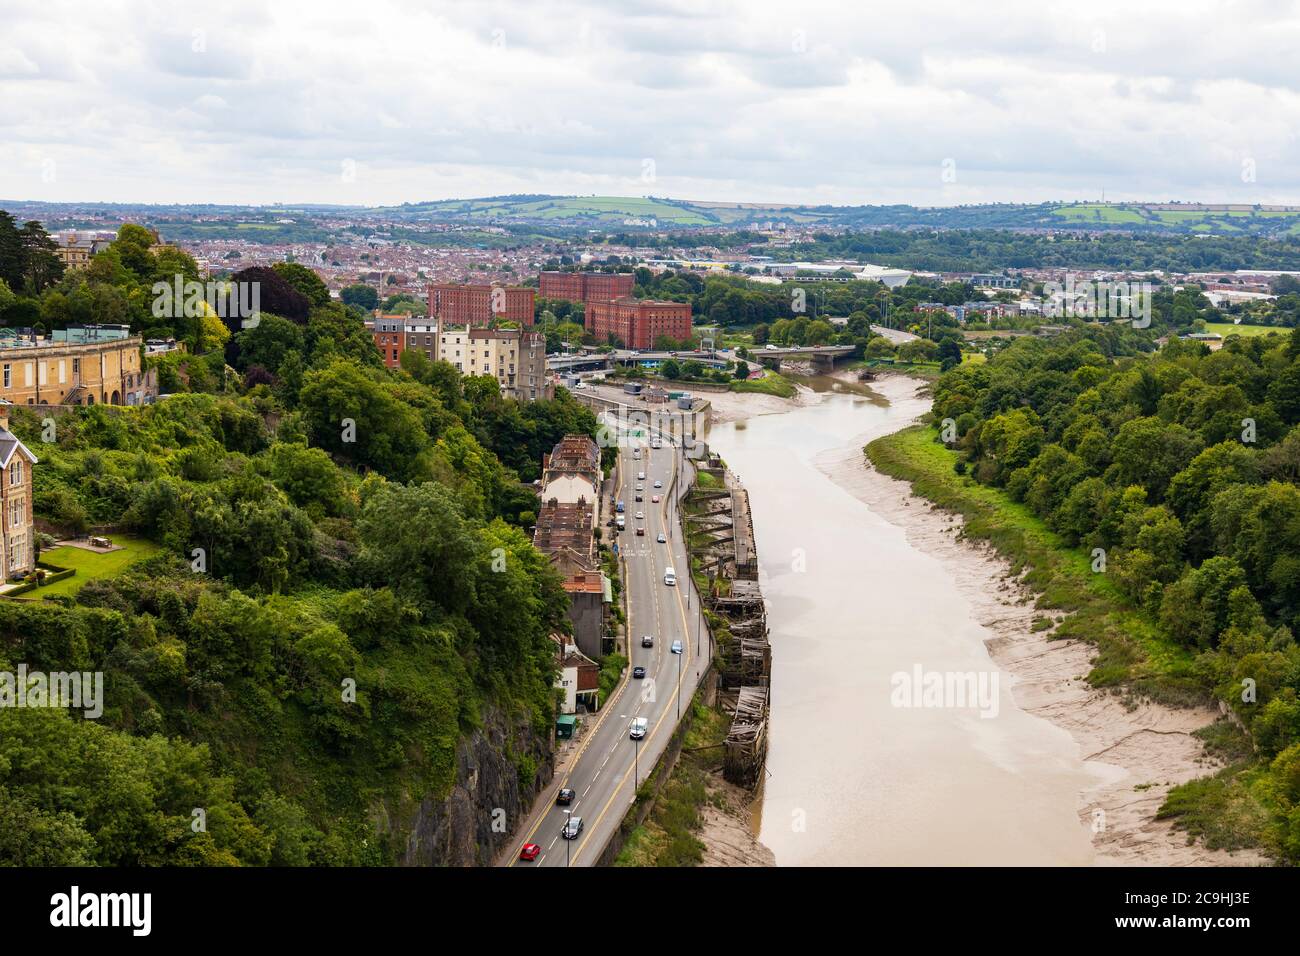 View along the river Avon towards Bristol from Isambard Kingdom Brunel Clifton Suspension Bridge over the Avon Gorge, between Clifton and Leigh Woods Stock Photo